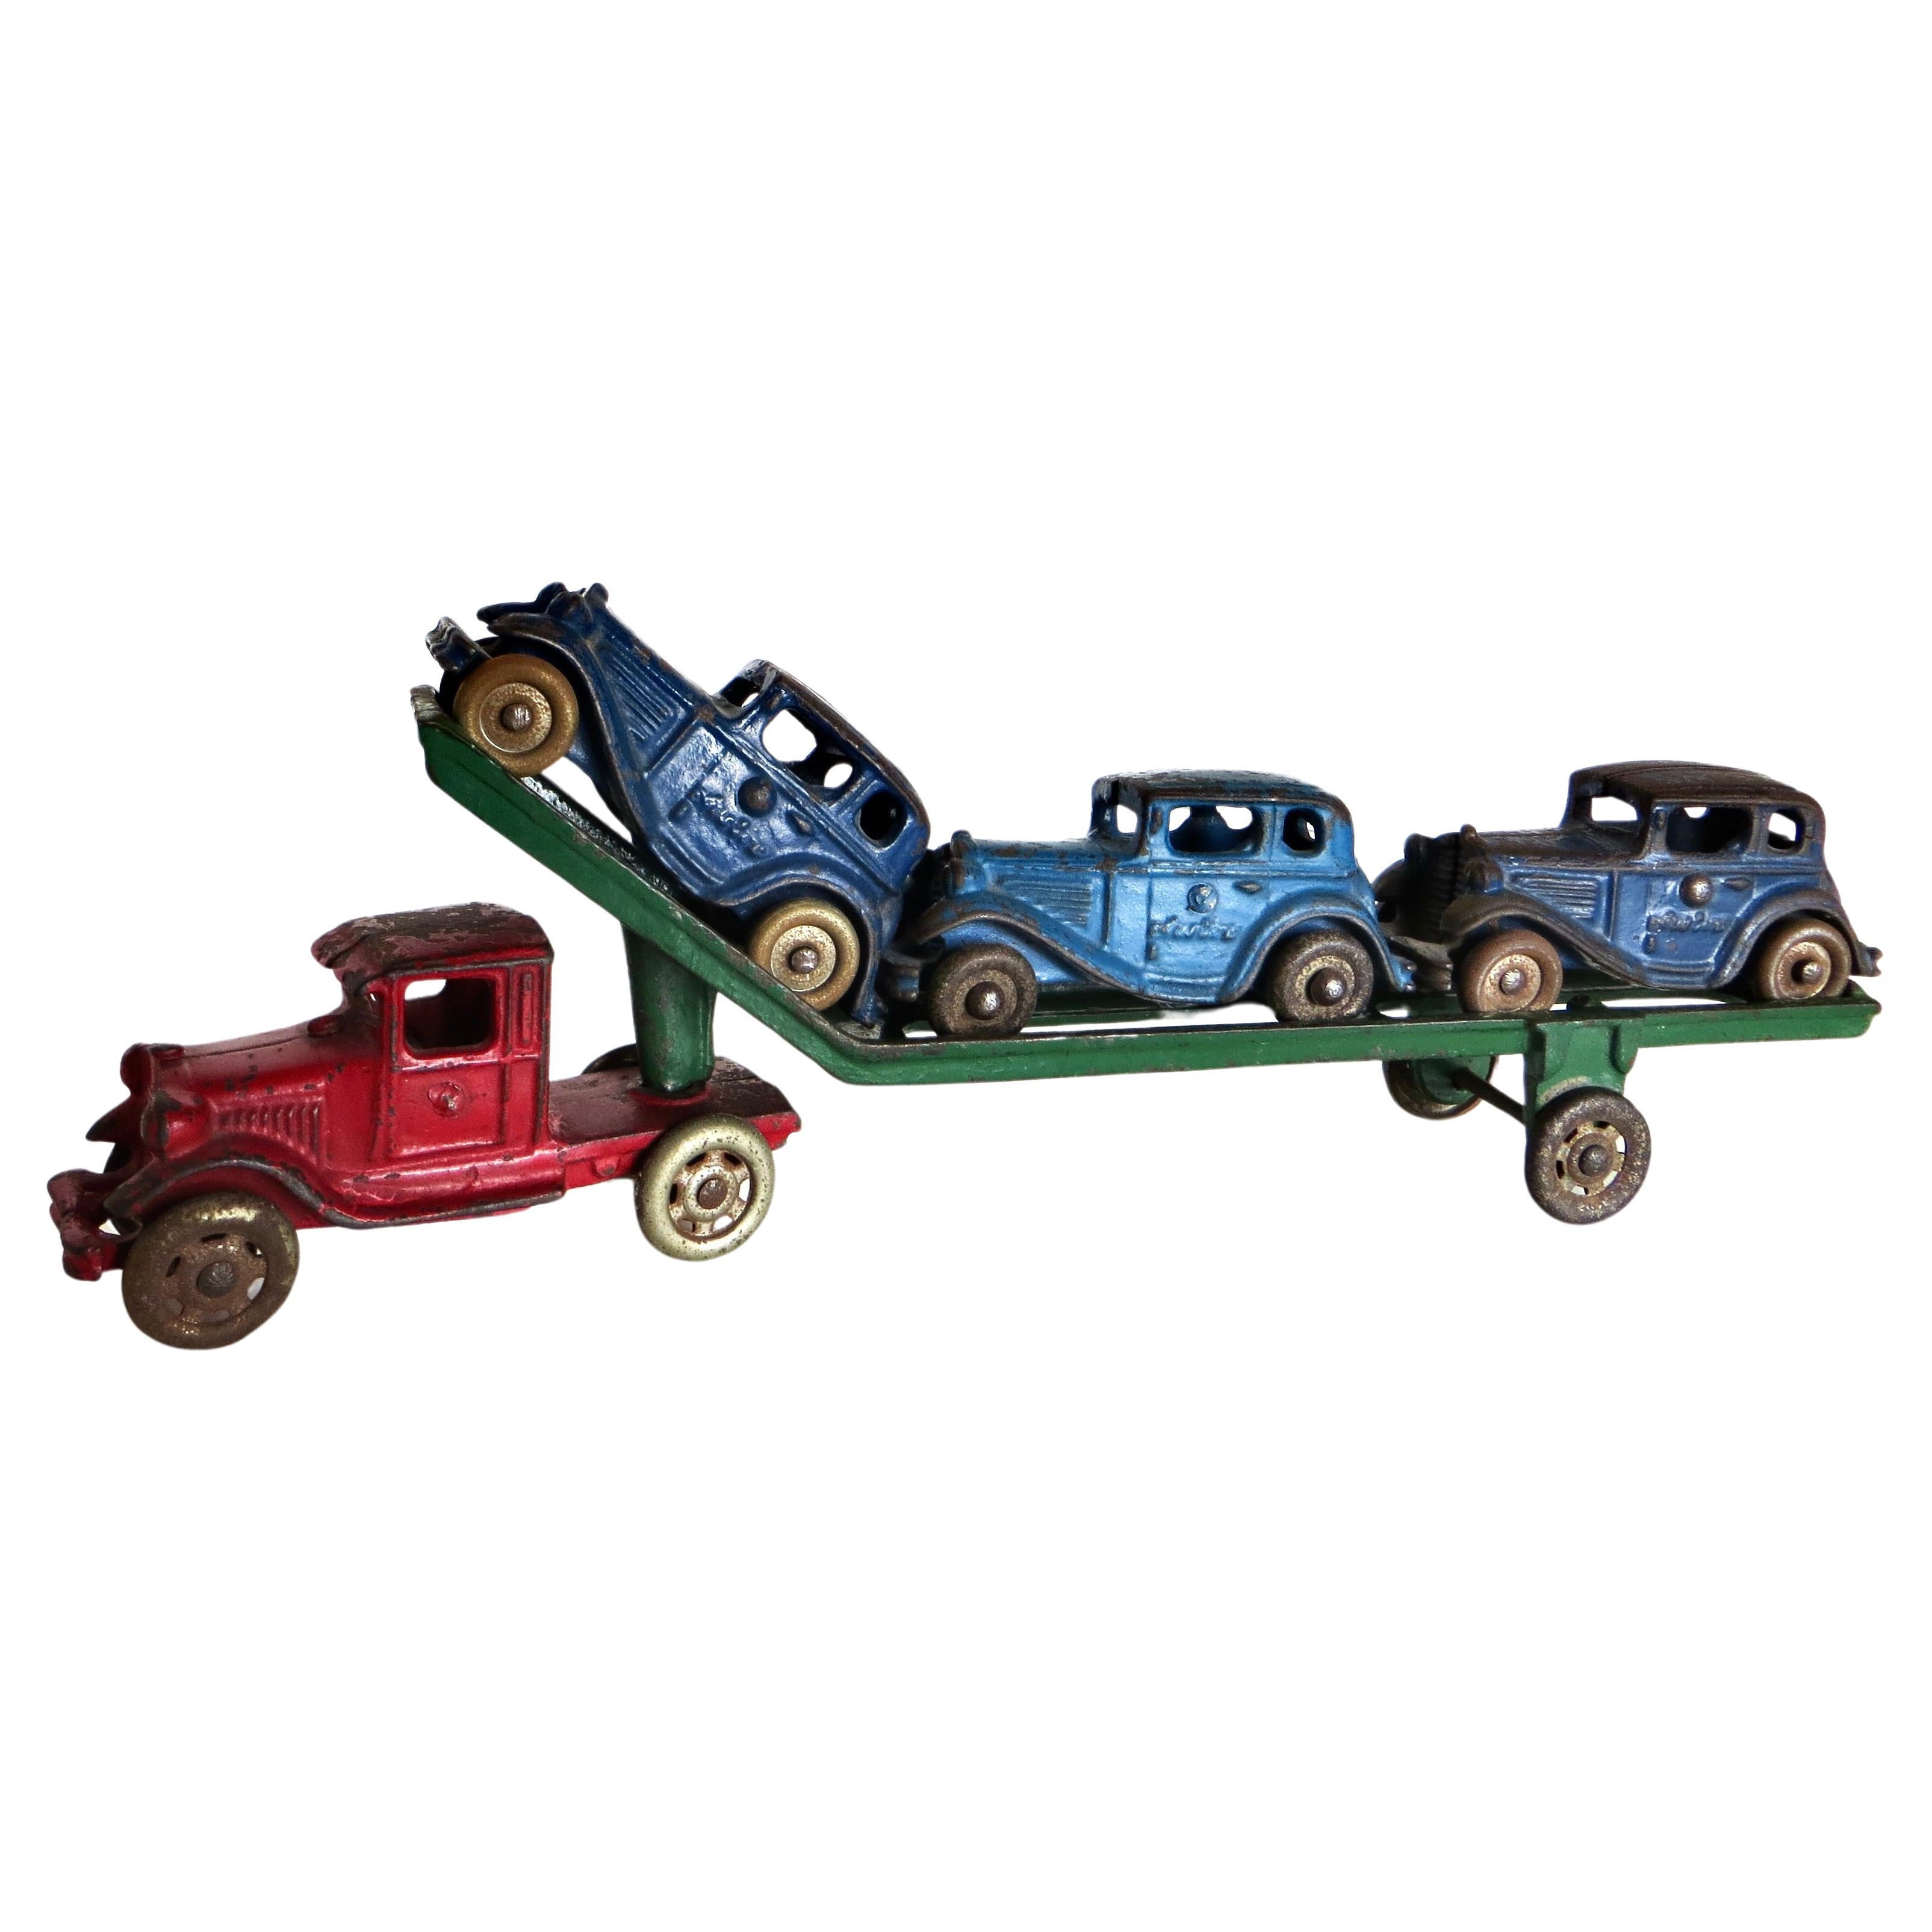 Toy Cast Iron Truck Car Carrier; Three Cars by A.C. Williams American Circa 1930 For Sale